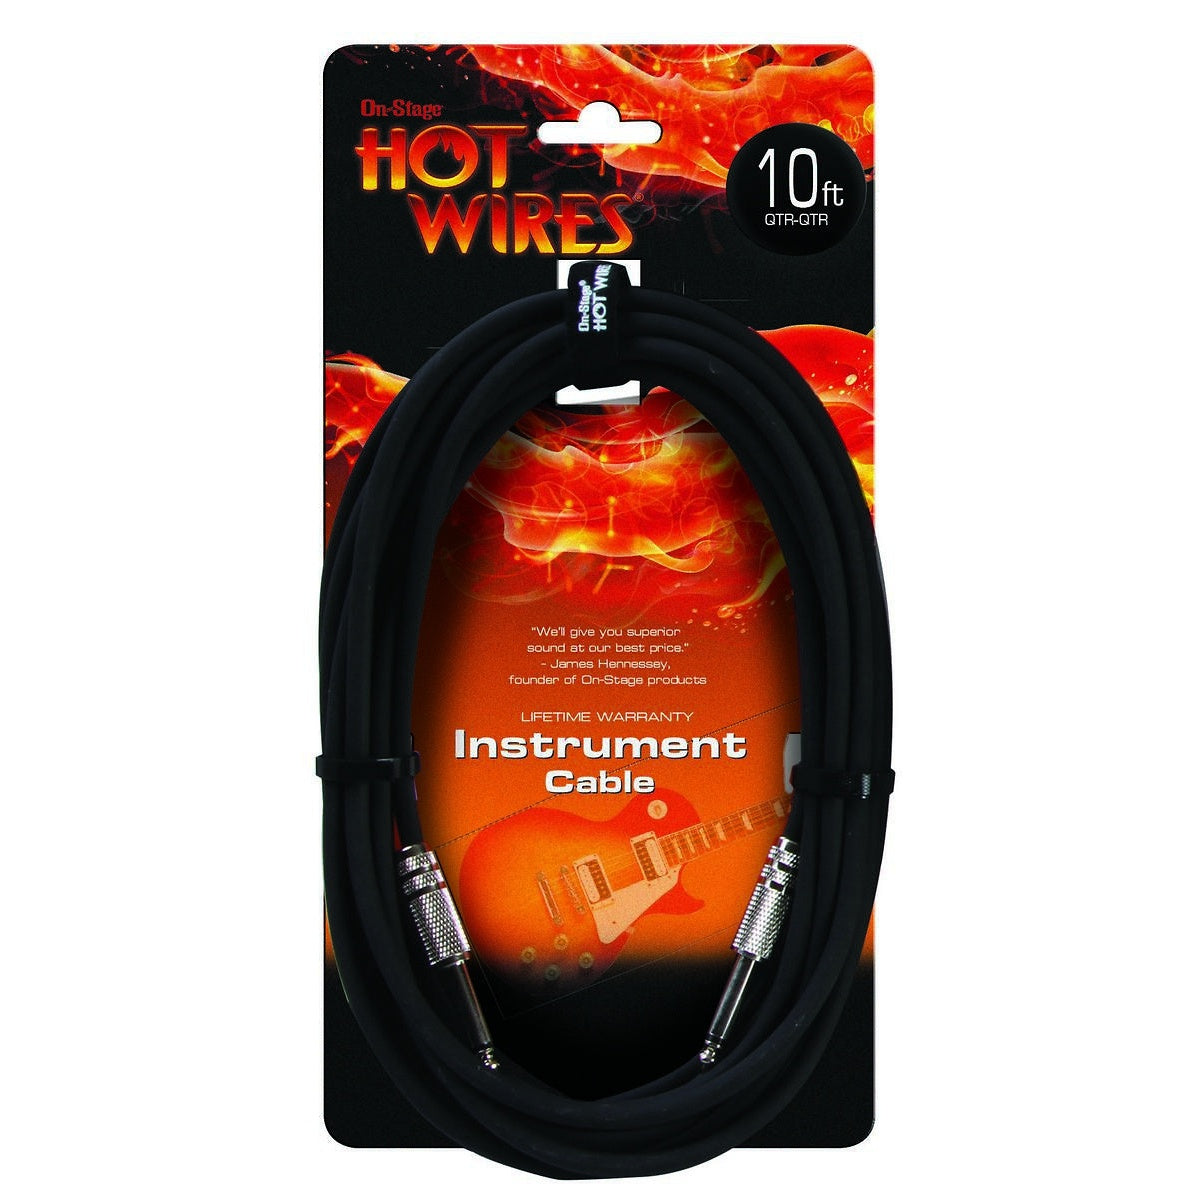 Hot Wires Guitar Instrument Cable, 10 Foot